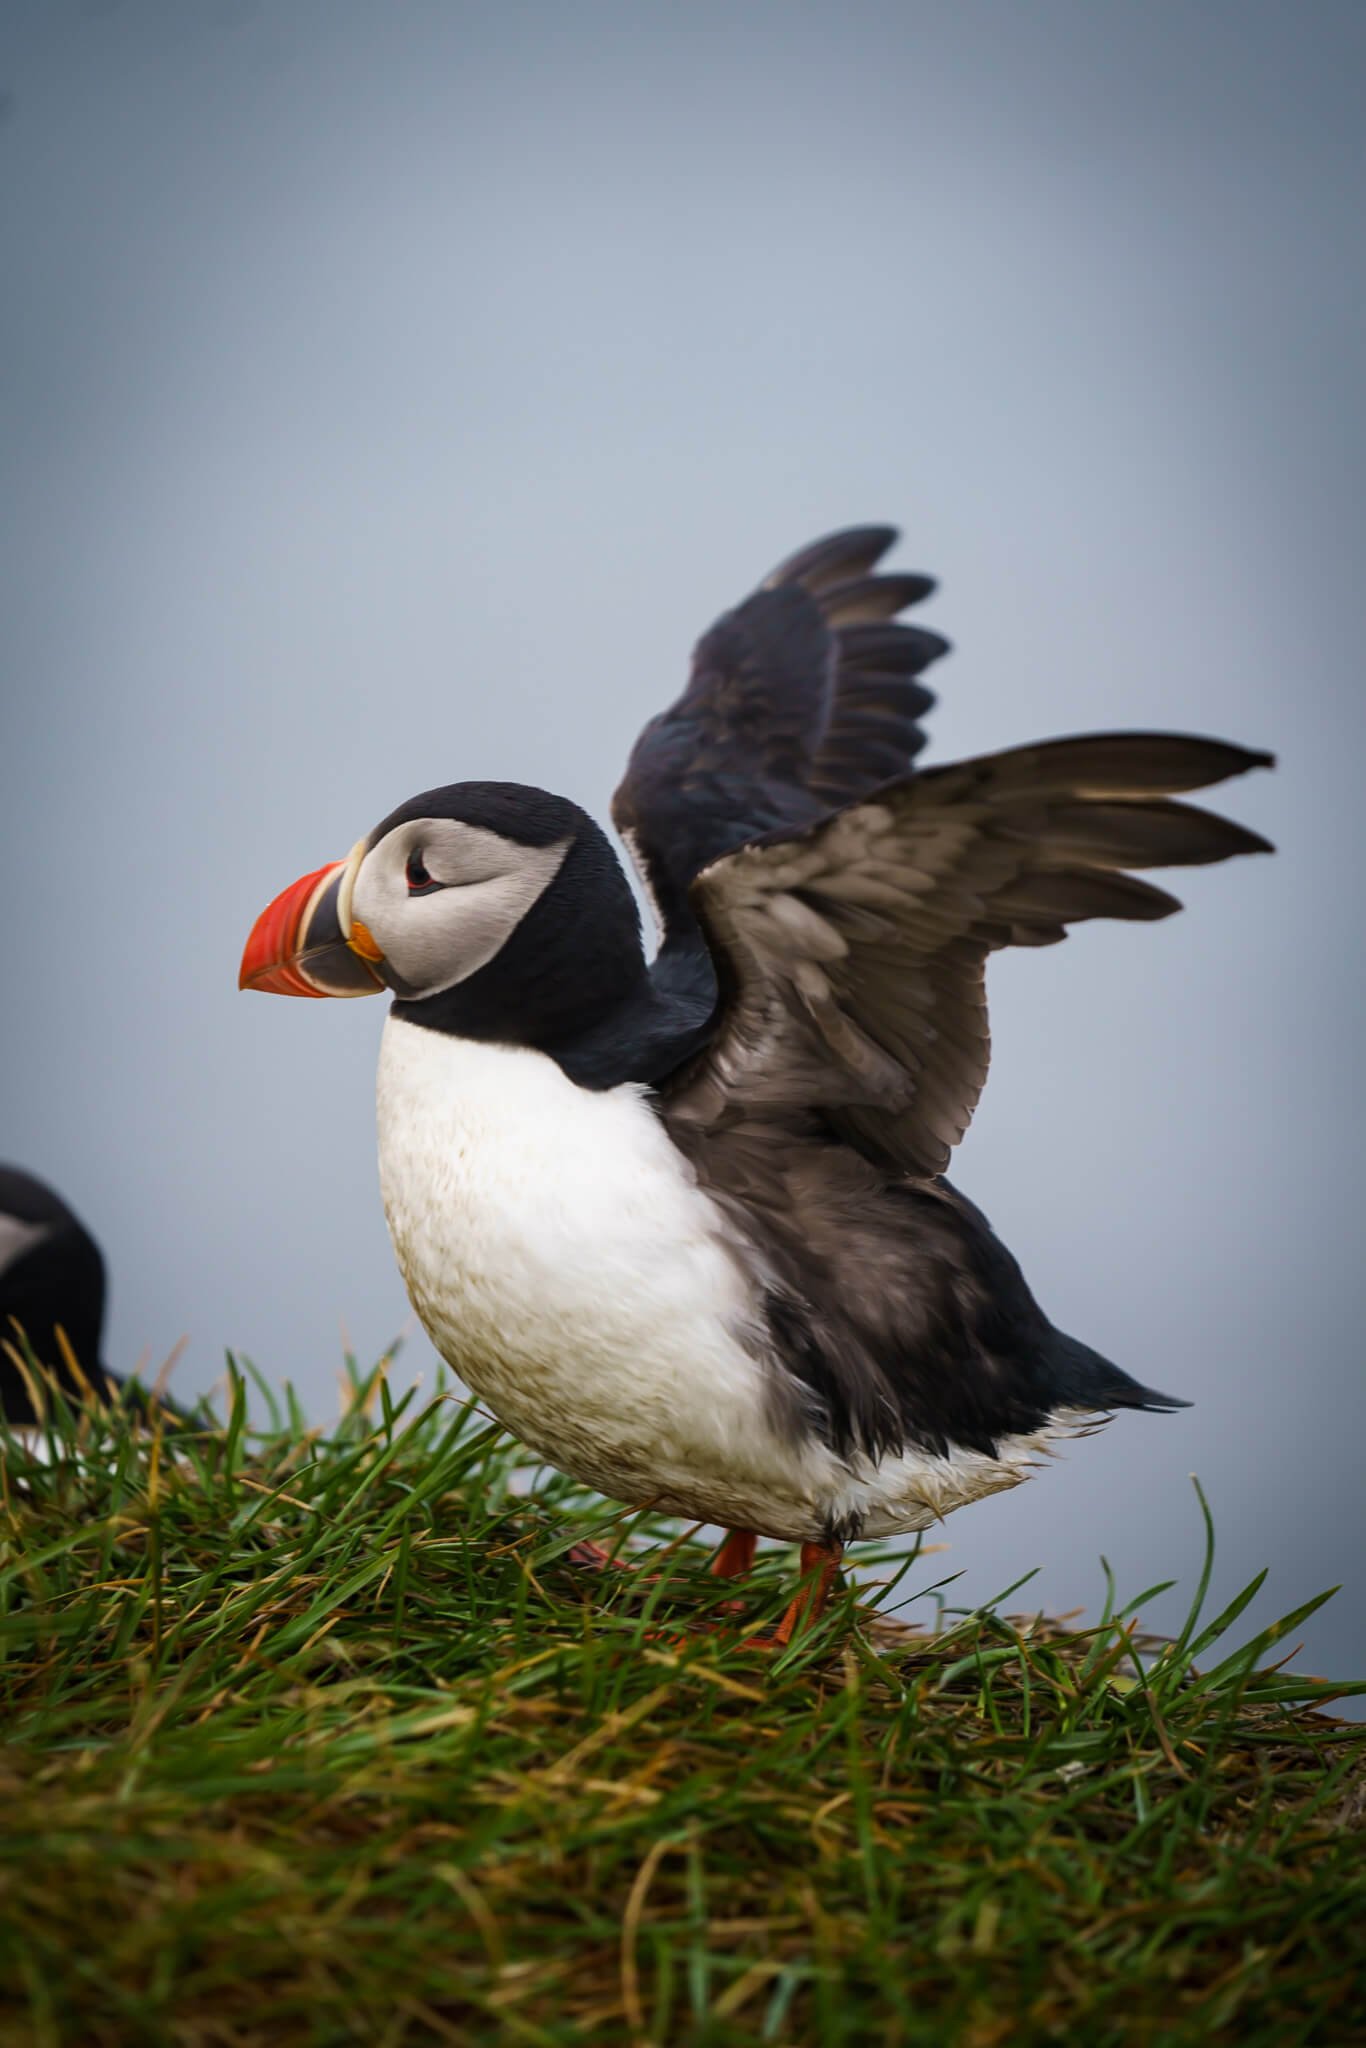 puffins in Iceland